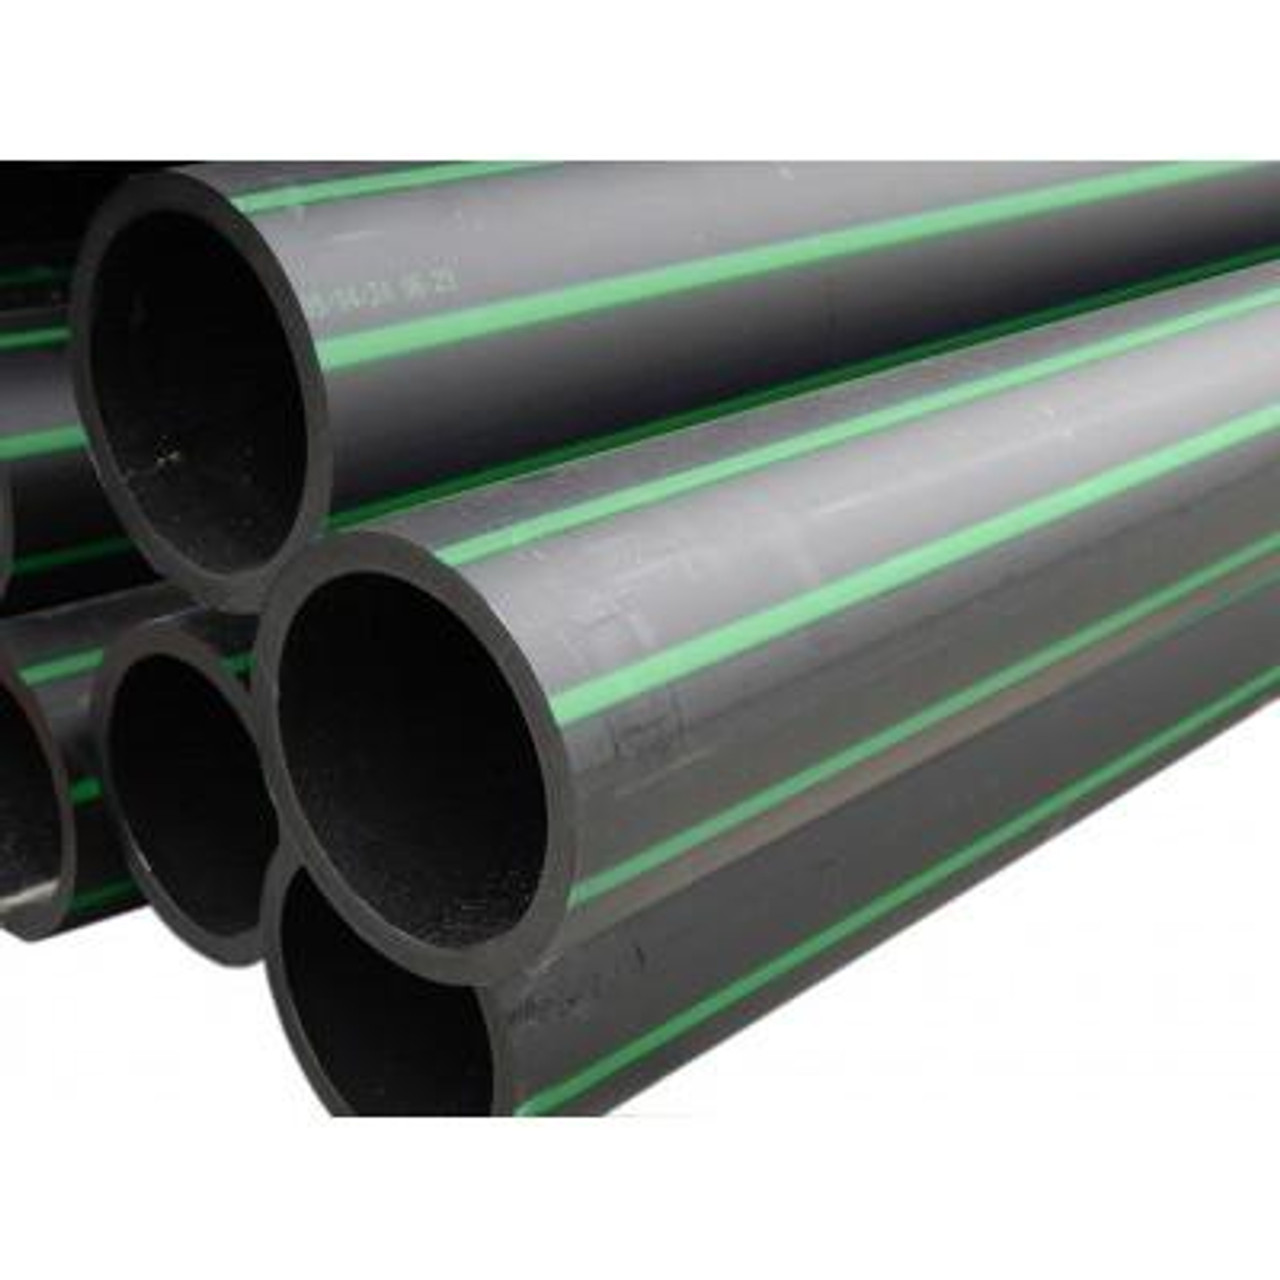 2" Rural Green Stripe Poly Pipe x 100m coil - rated to 800 kPa